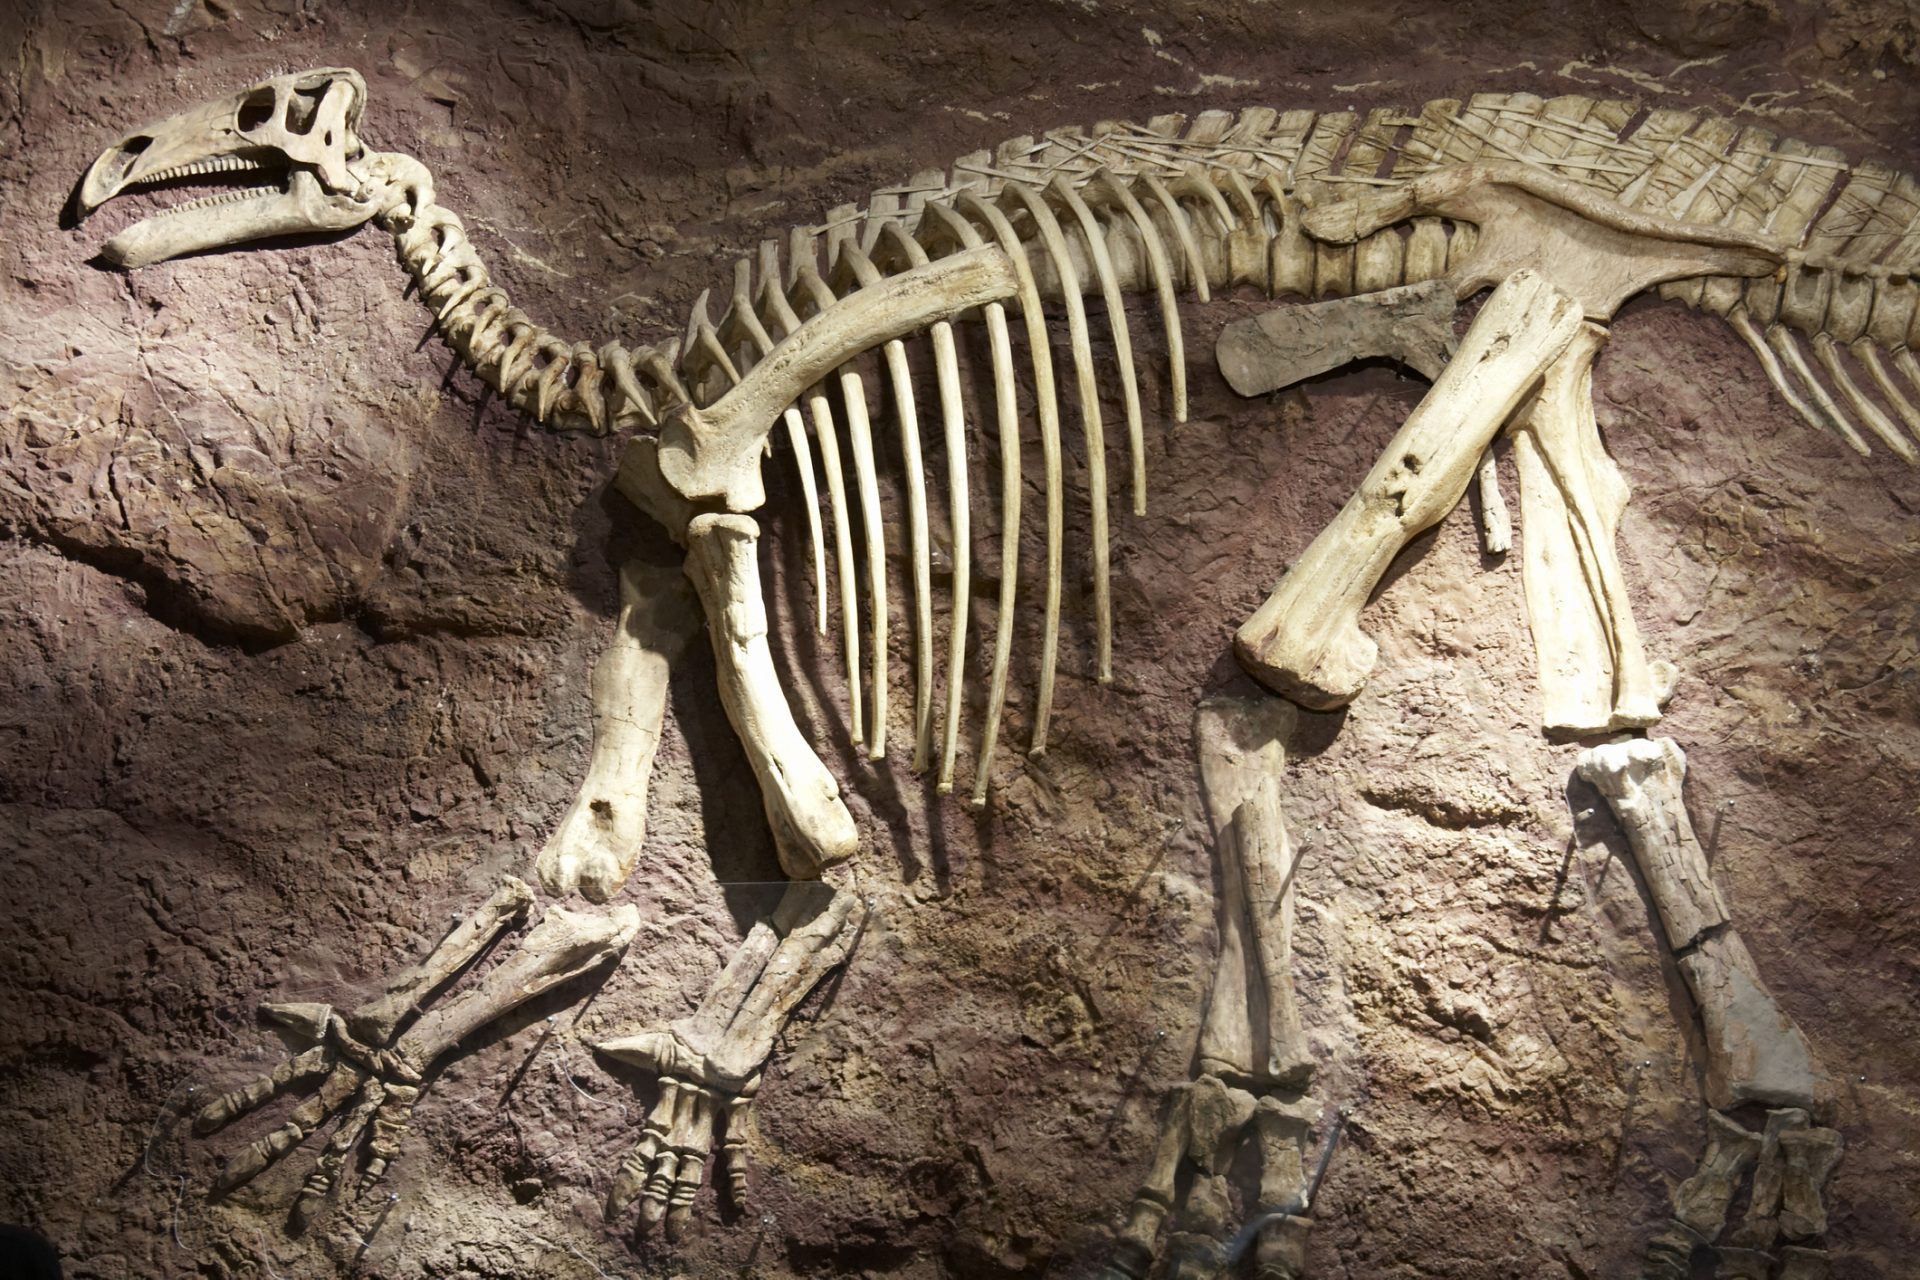 Researchers used dinosaur fossils to challenge a long-held scientific theory